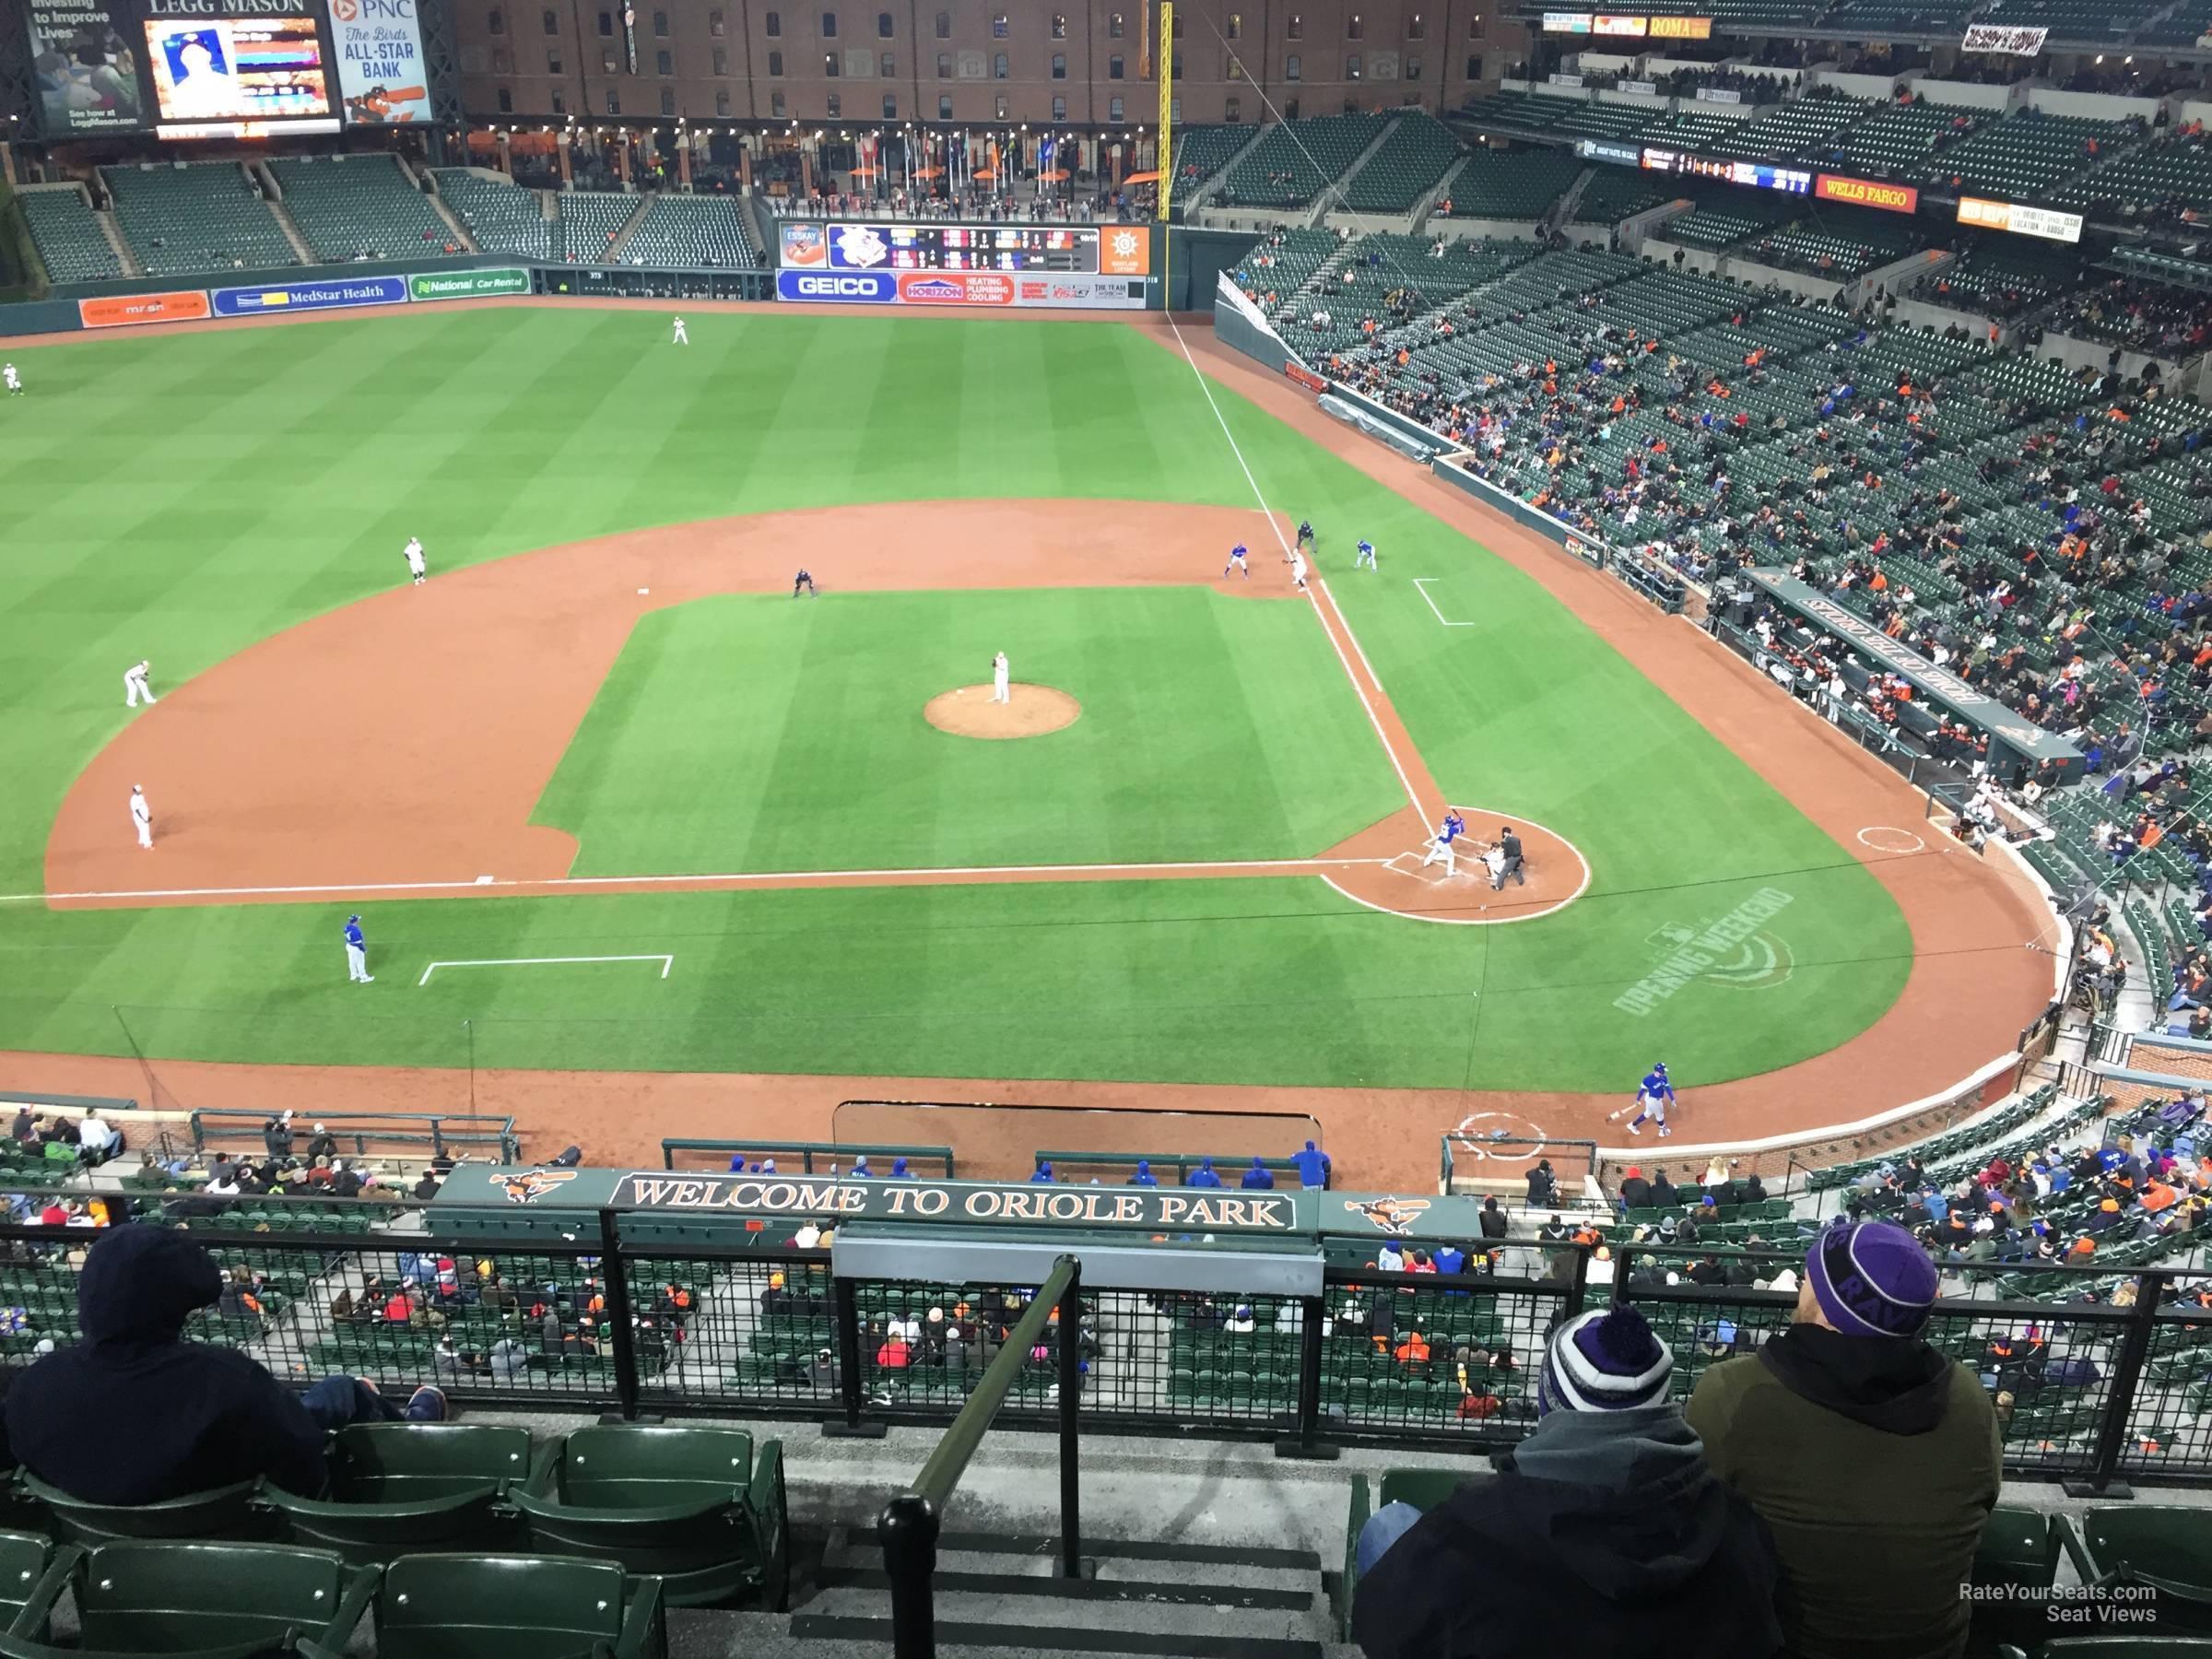 section 350, row 3 seat view  - oriole park